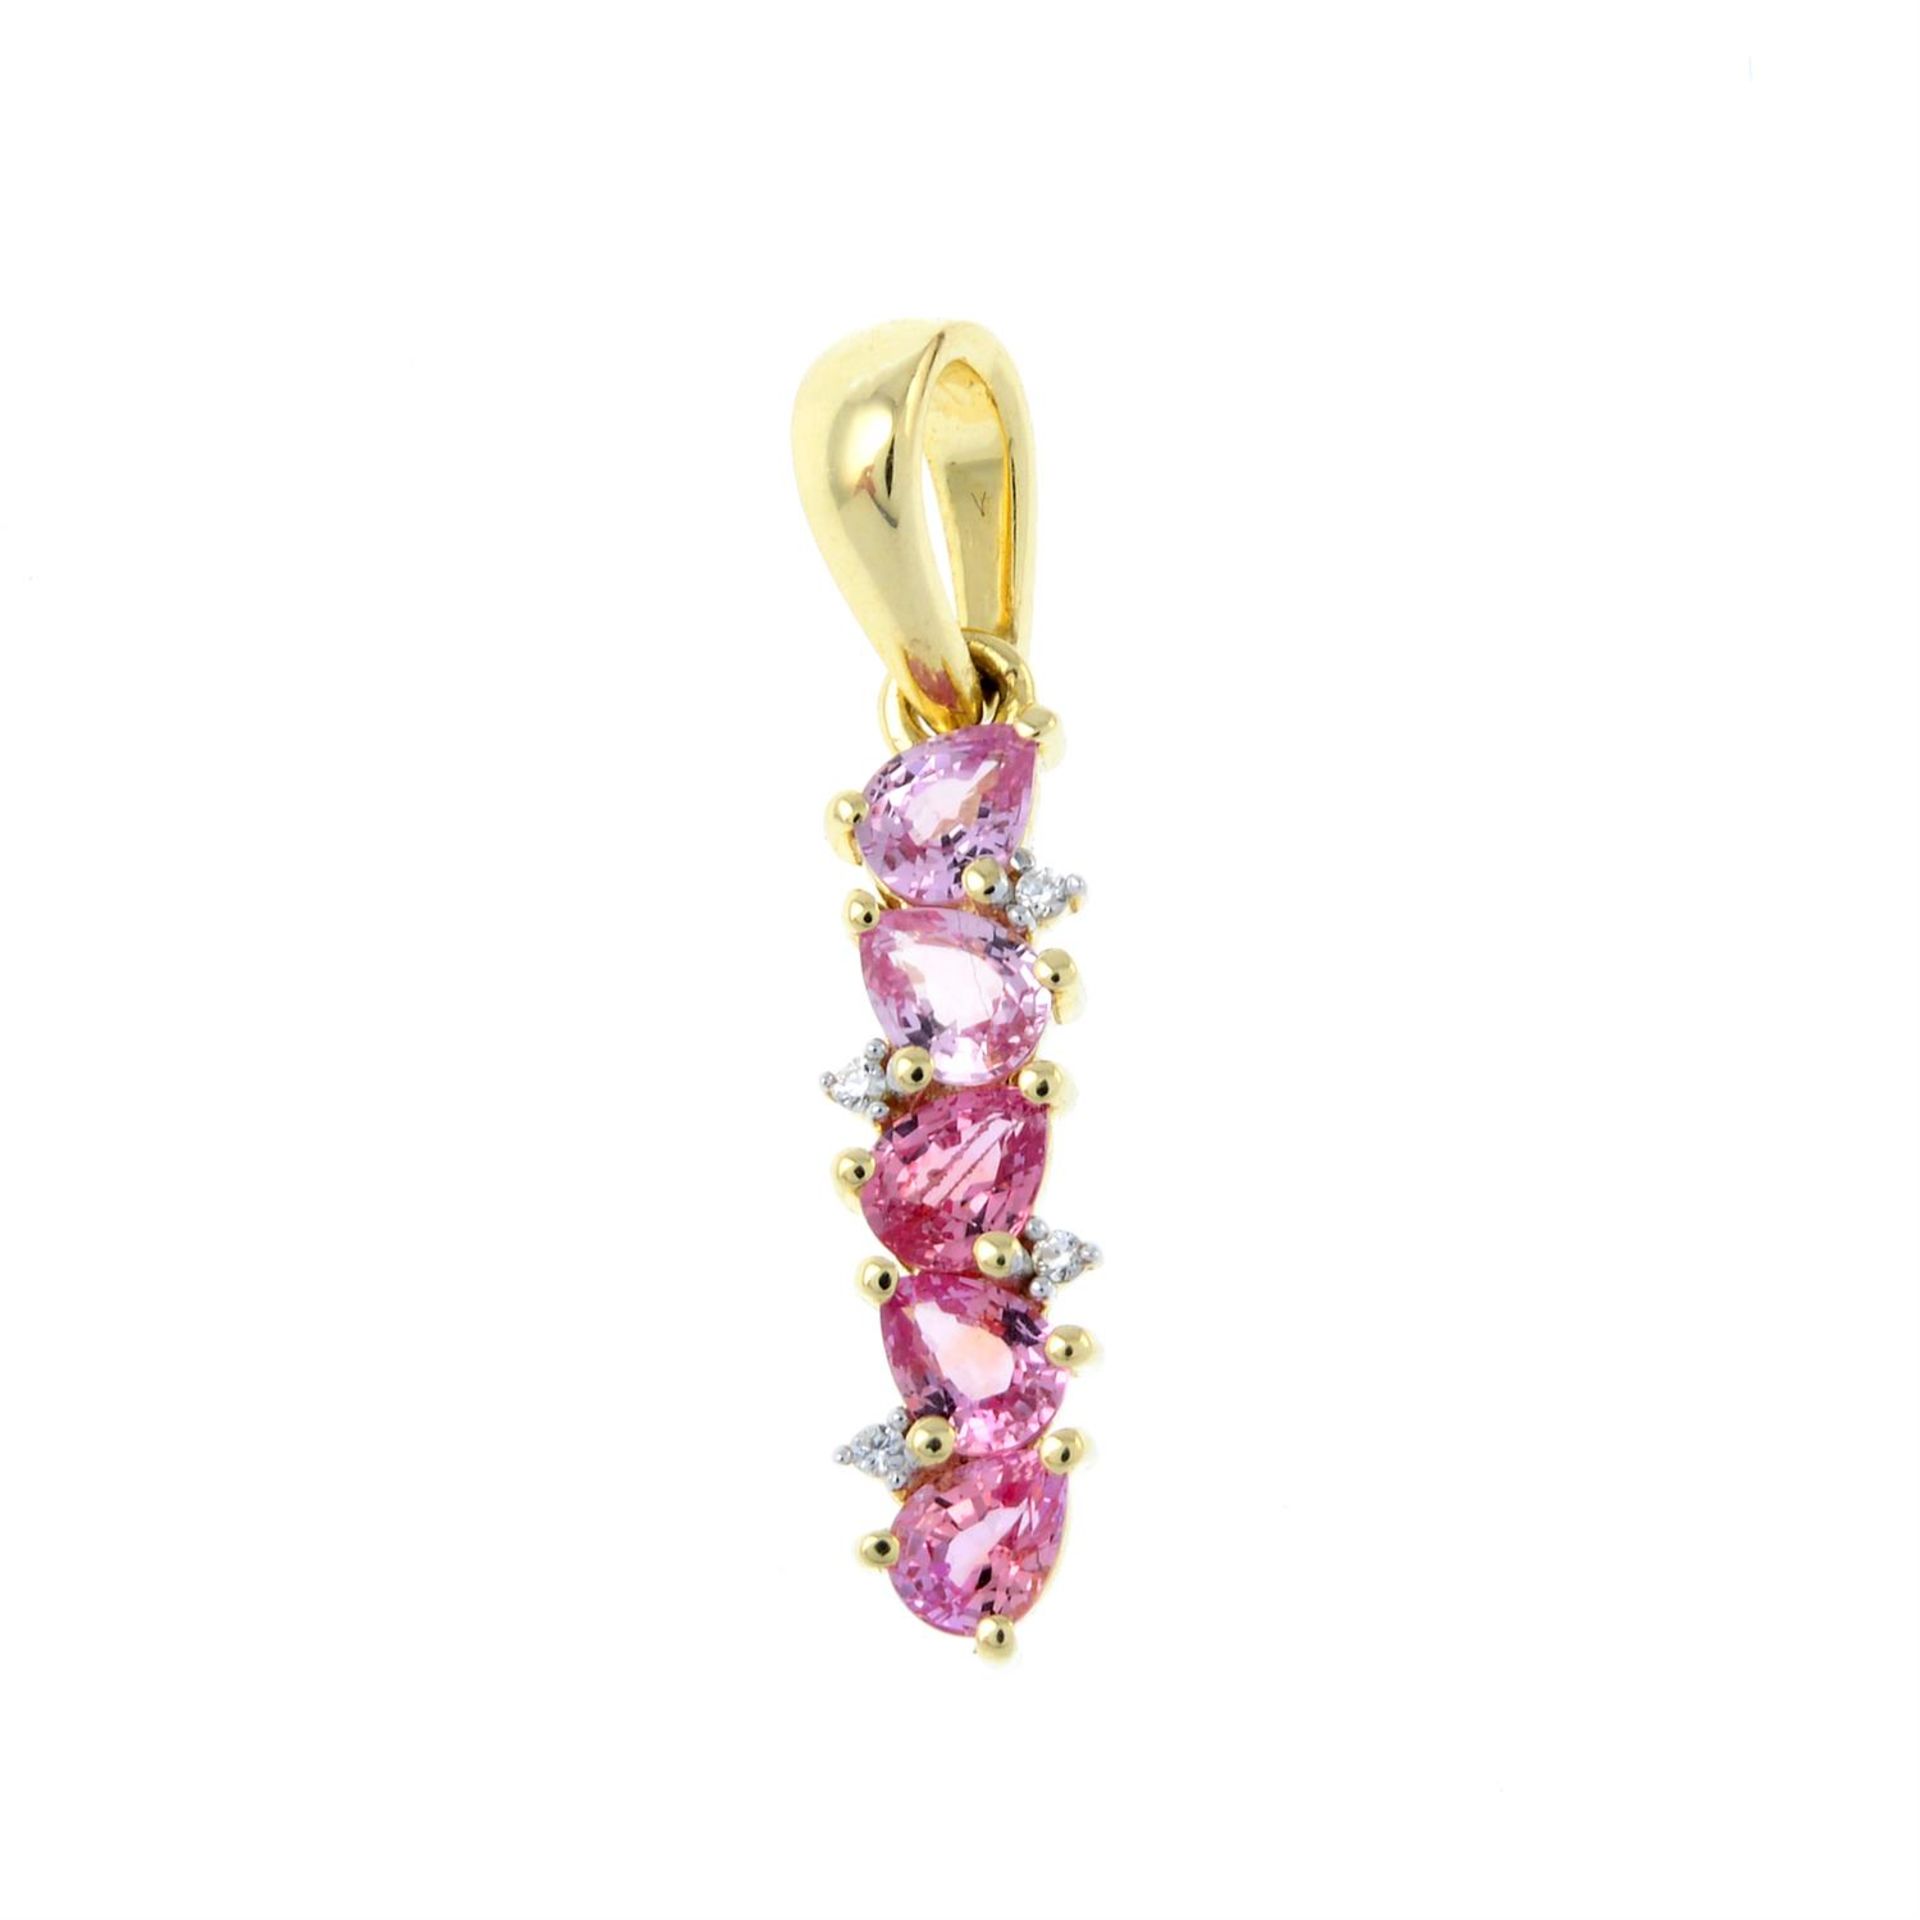 A 9ct gold pink sapphire and diamond pendant.